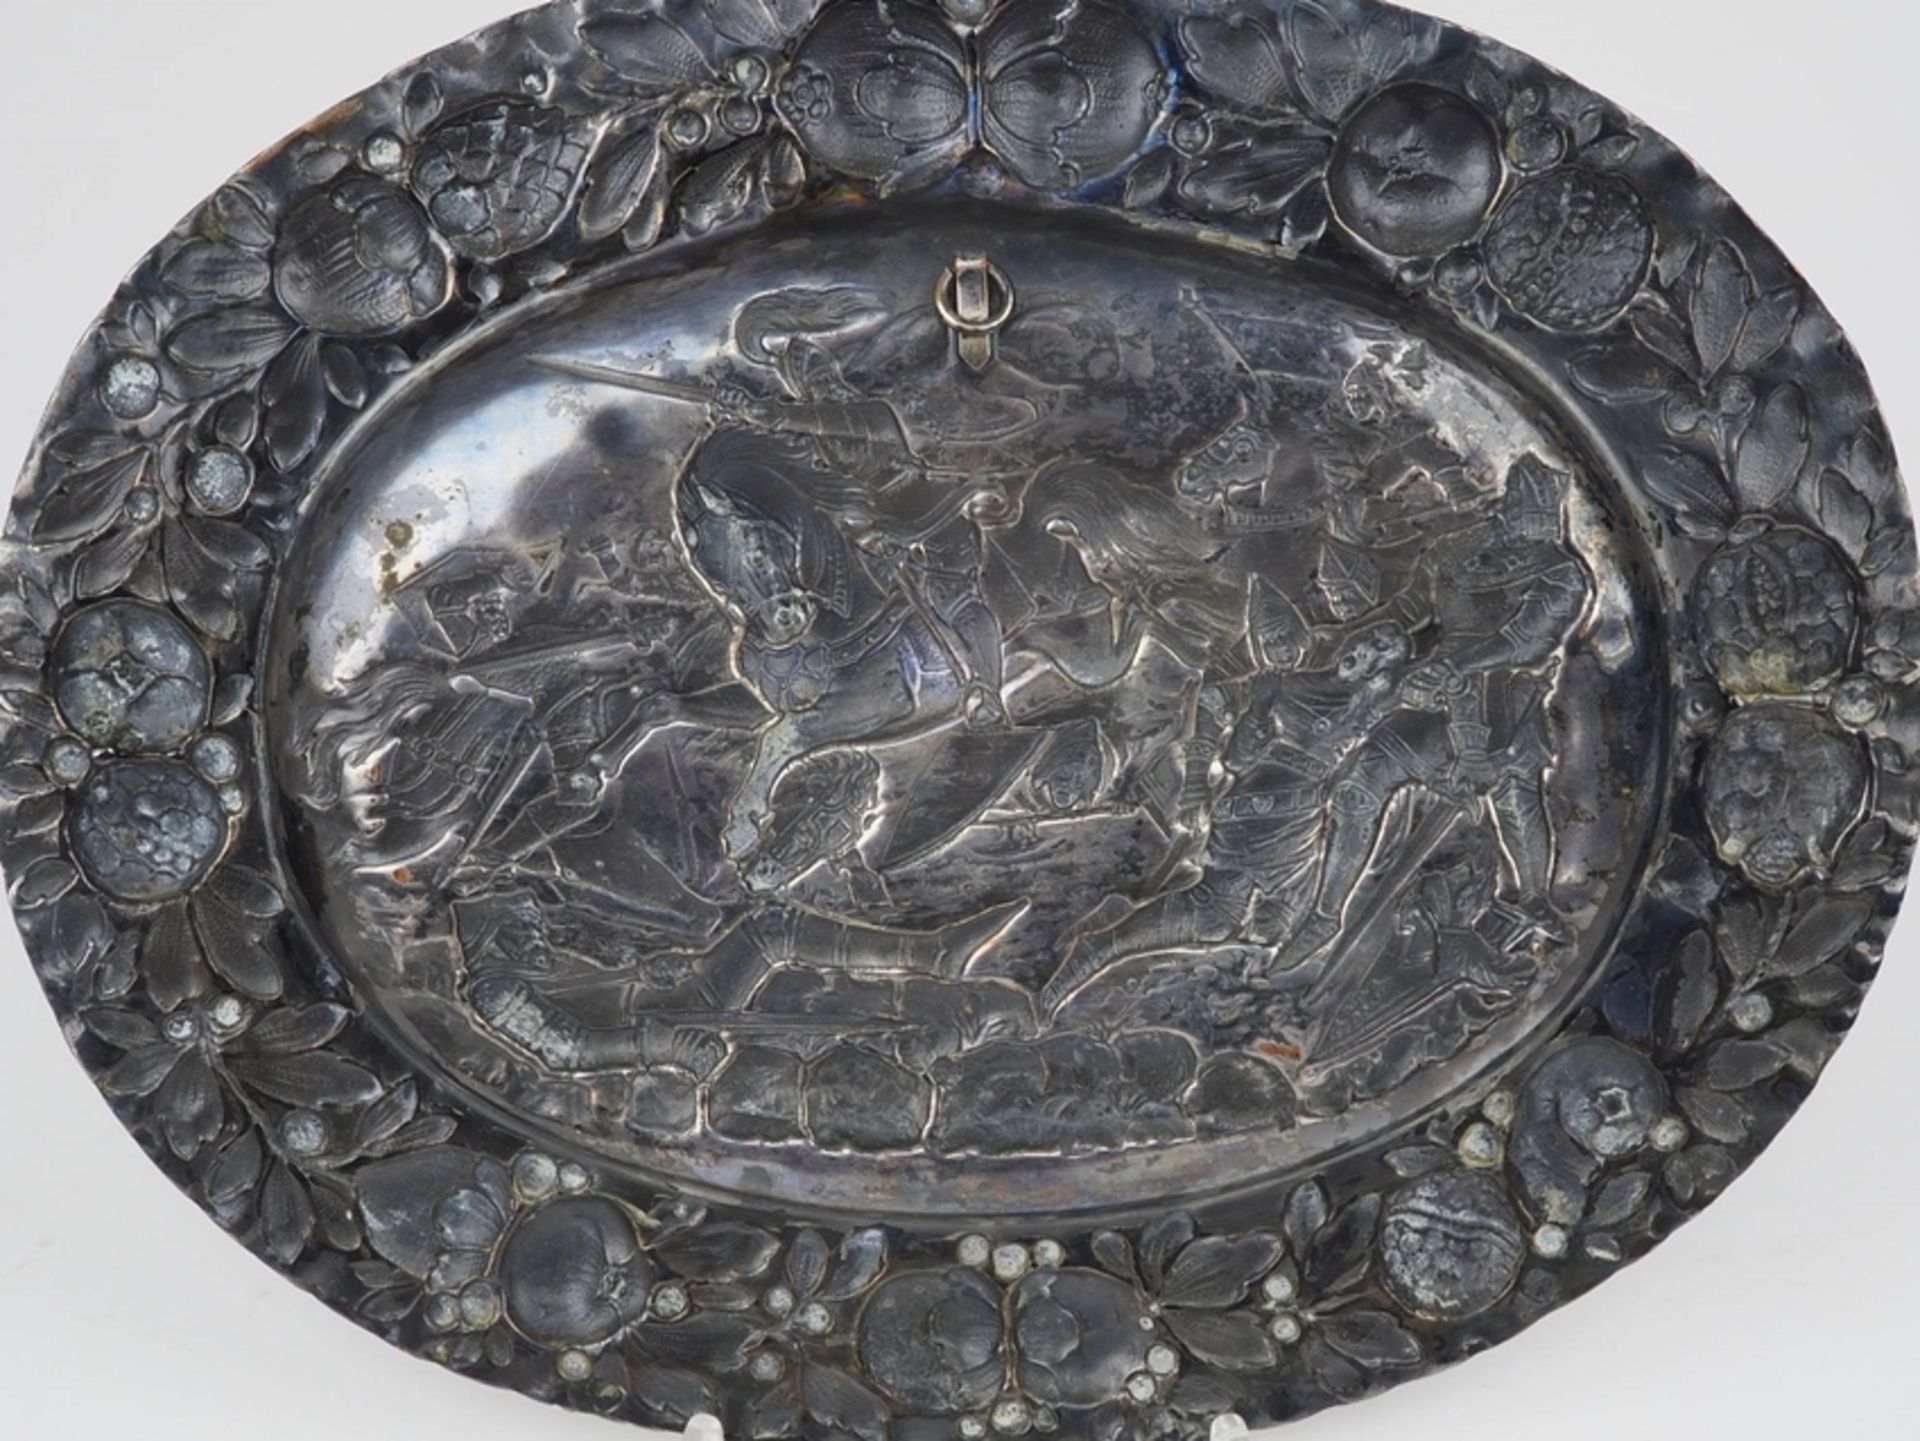 Wall plate motif knight battle, silver plated, 19th c. - Image 3 of 3